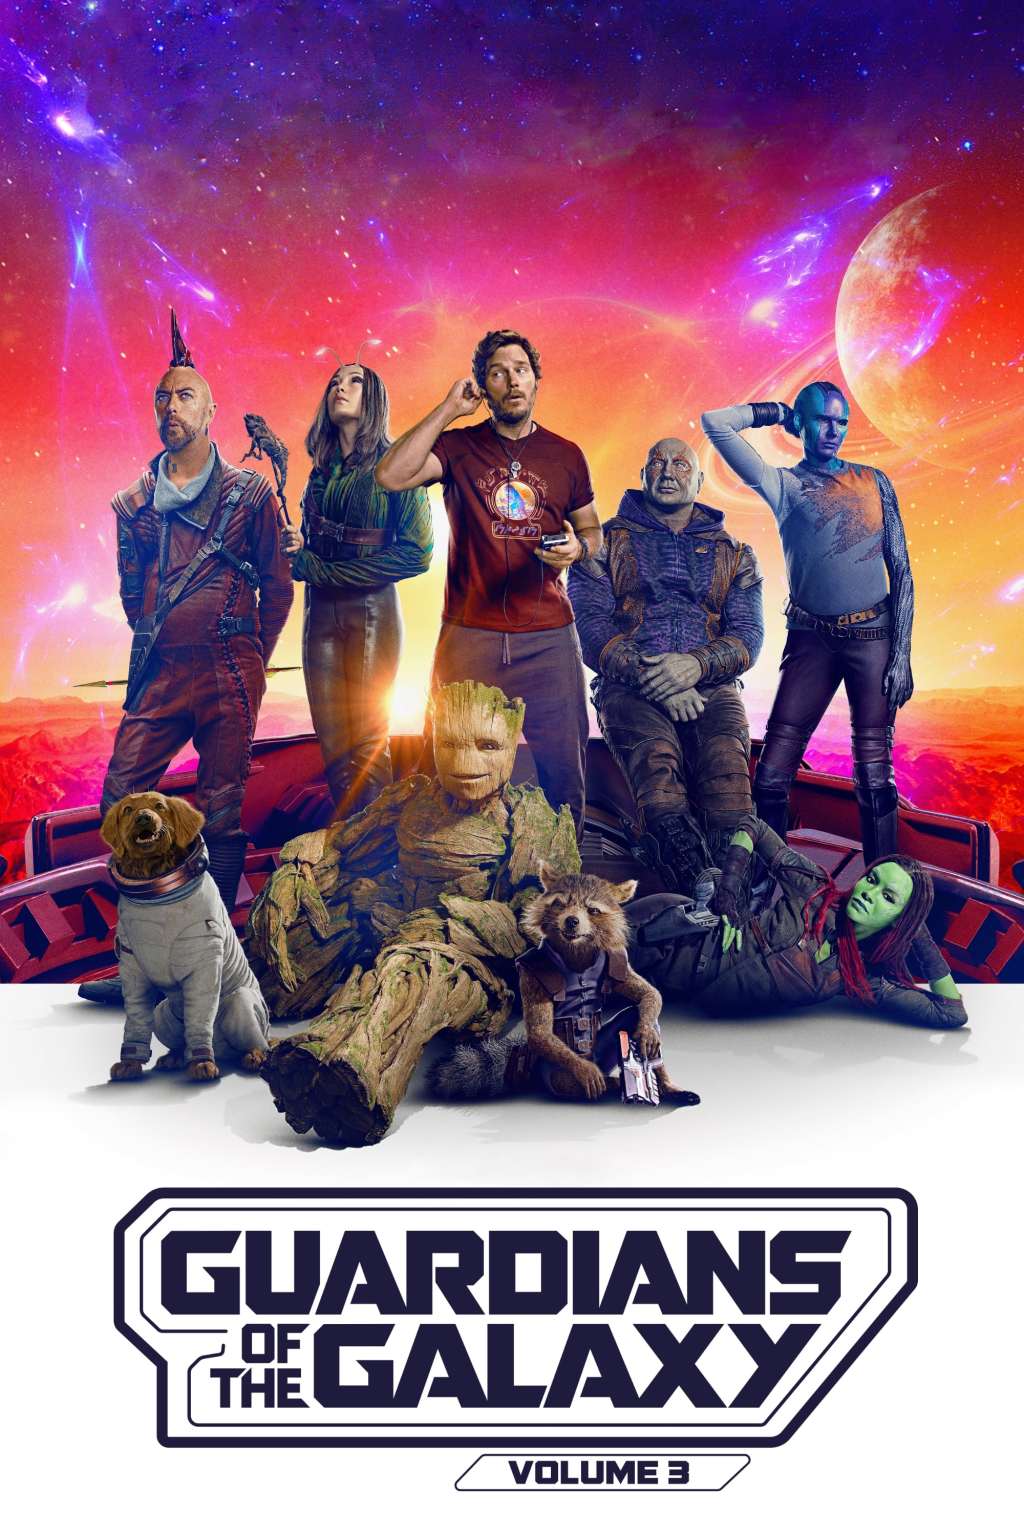 Guardians of the Galaxy Vol.3 – It is really a superhero comedy.